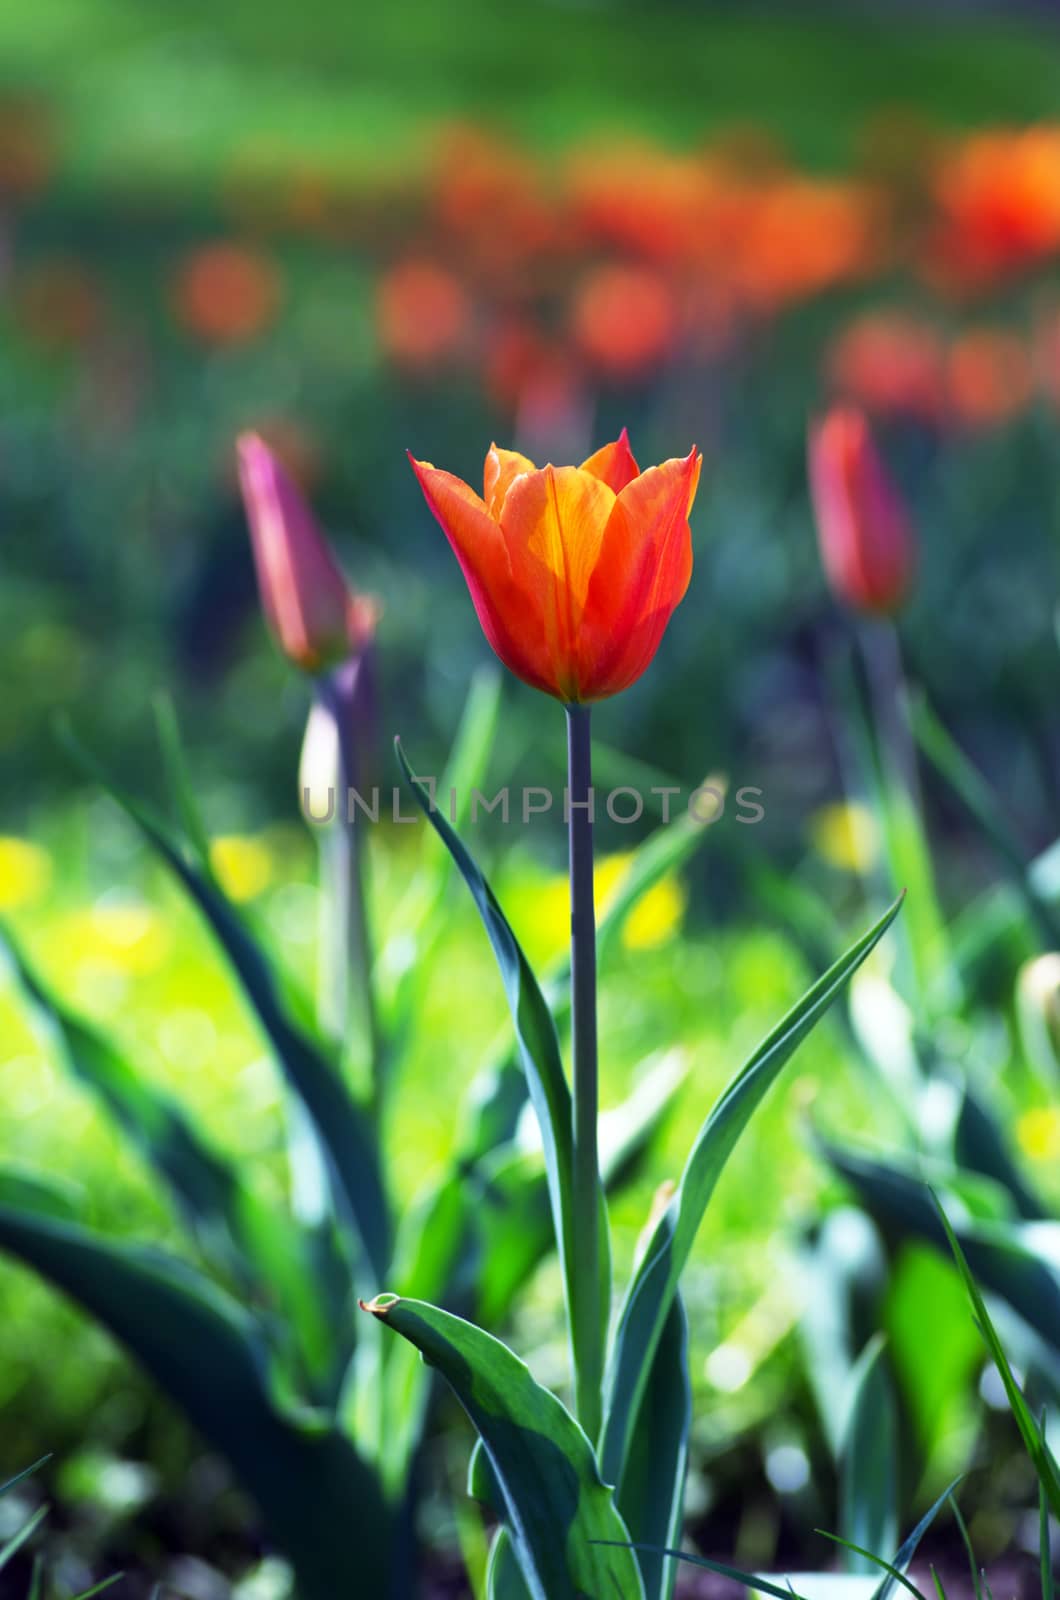  Spring background with tulips over natural background by dolnikow